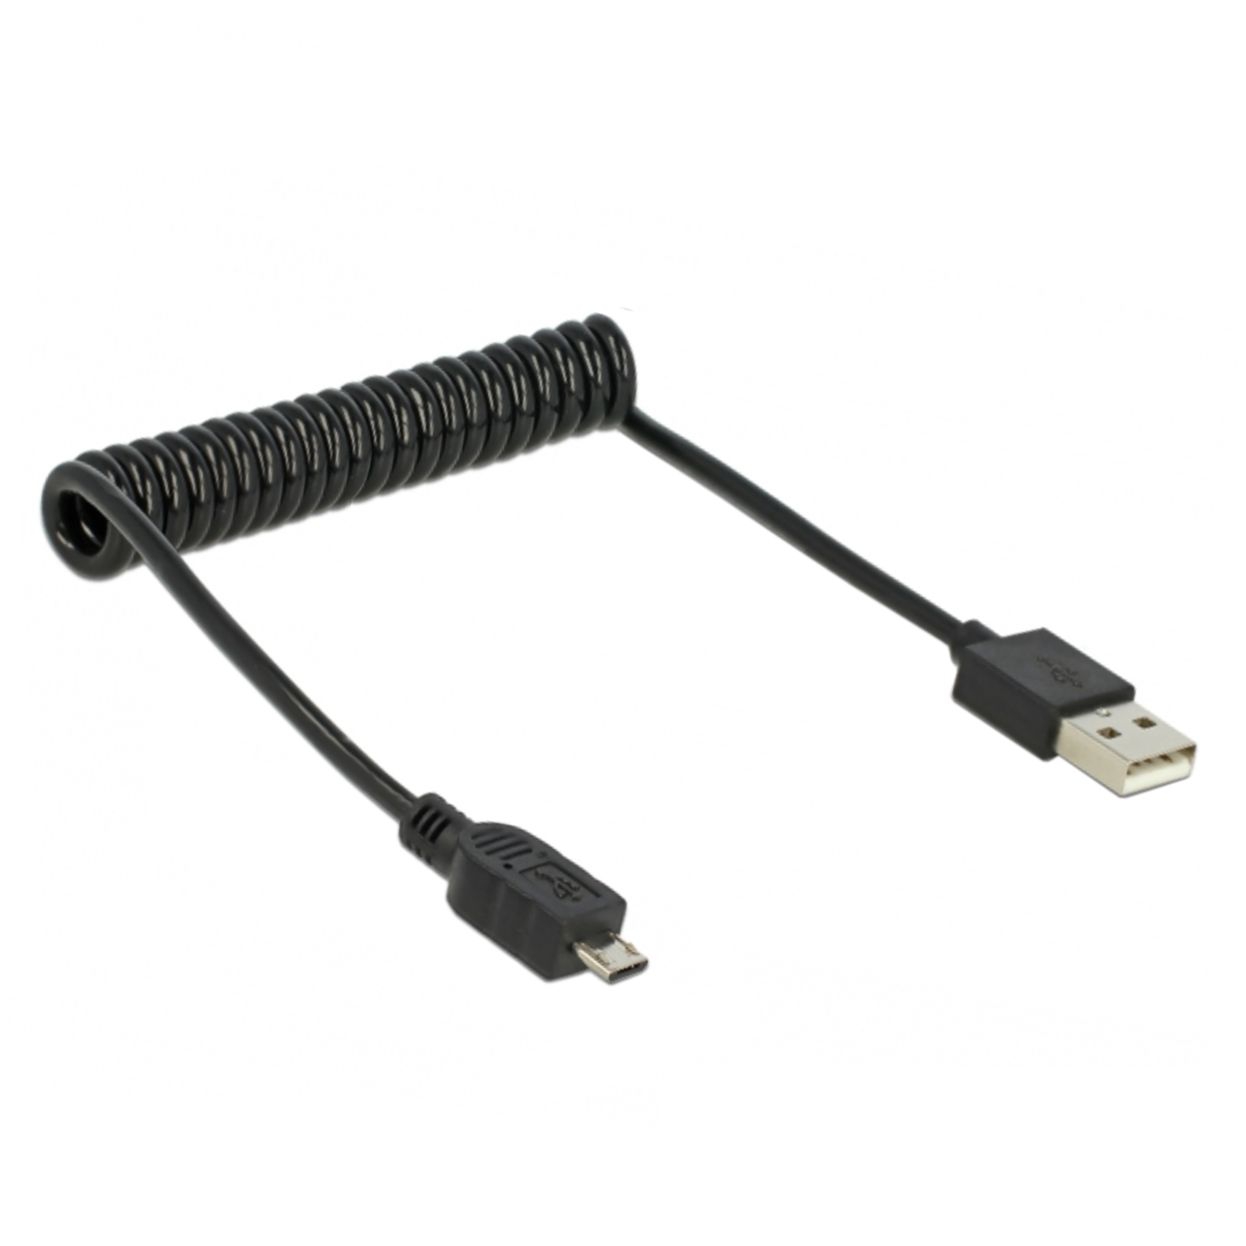 USB spiral connection cable USB A to MICRO B 30cm to 60cm